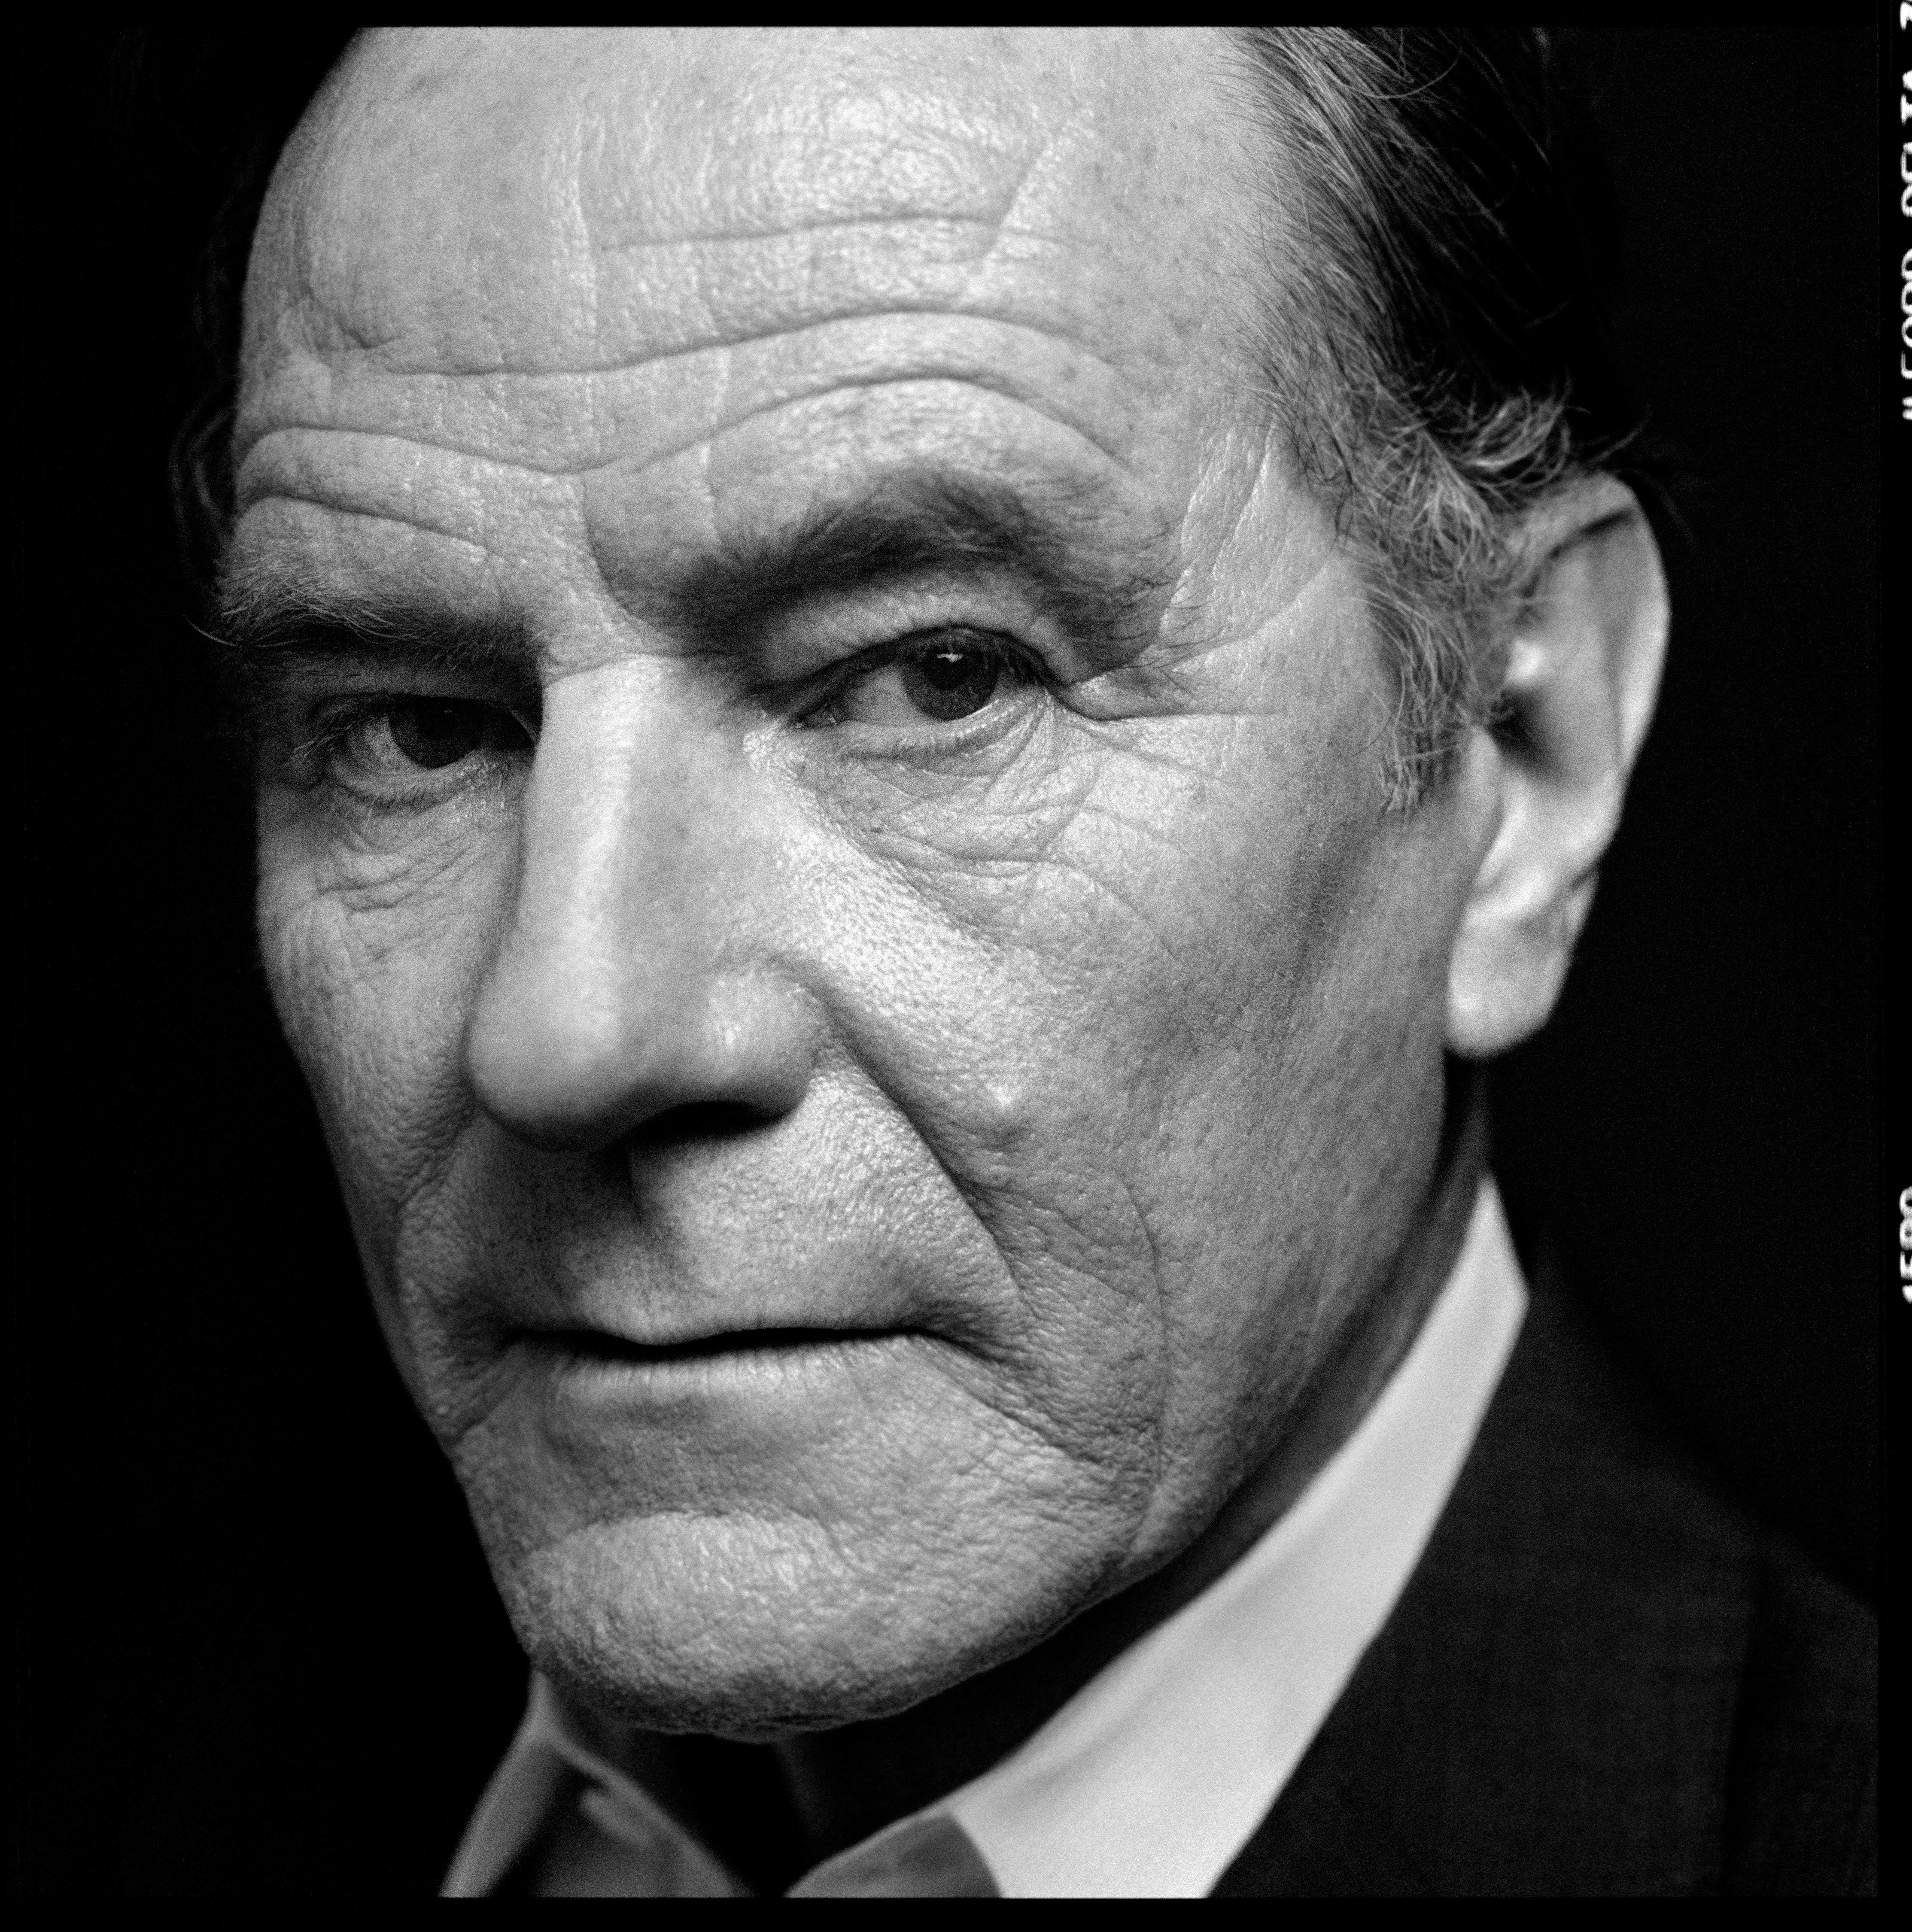 Bryan Cranston - Your Honor, Photo by Jesse Dittmar / For The Times